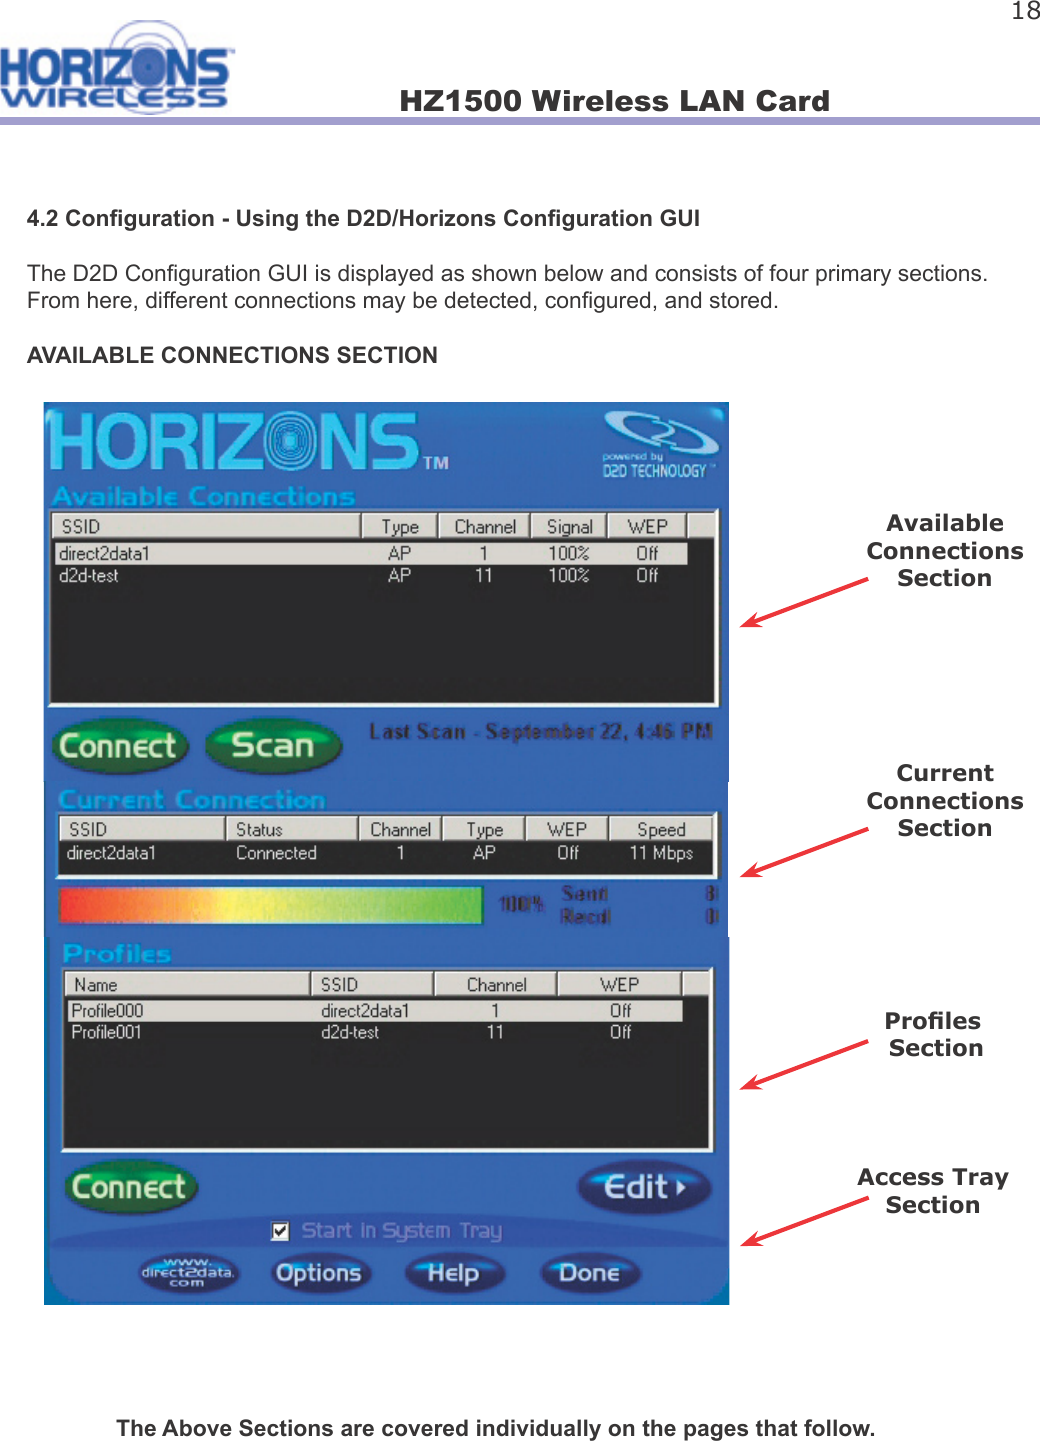 HZ1500 Wireless LAN Card 184.2 Con guration - Using the D2D/Horizons Con guration GUIThe D2D Con guration GUI is displayed as shown below and consists of four primary sections.  From here, different connections may be detected, con gured, and stored.AVAILABLE CONNECTIONS SECTION                     The Above Sections are covered individually on the pages that follow. Available Connections SectionCurrent Connections SectionPro les SectionAccess Tray Section